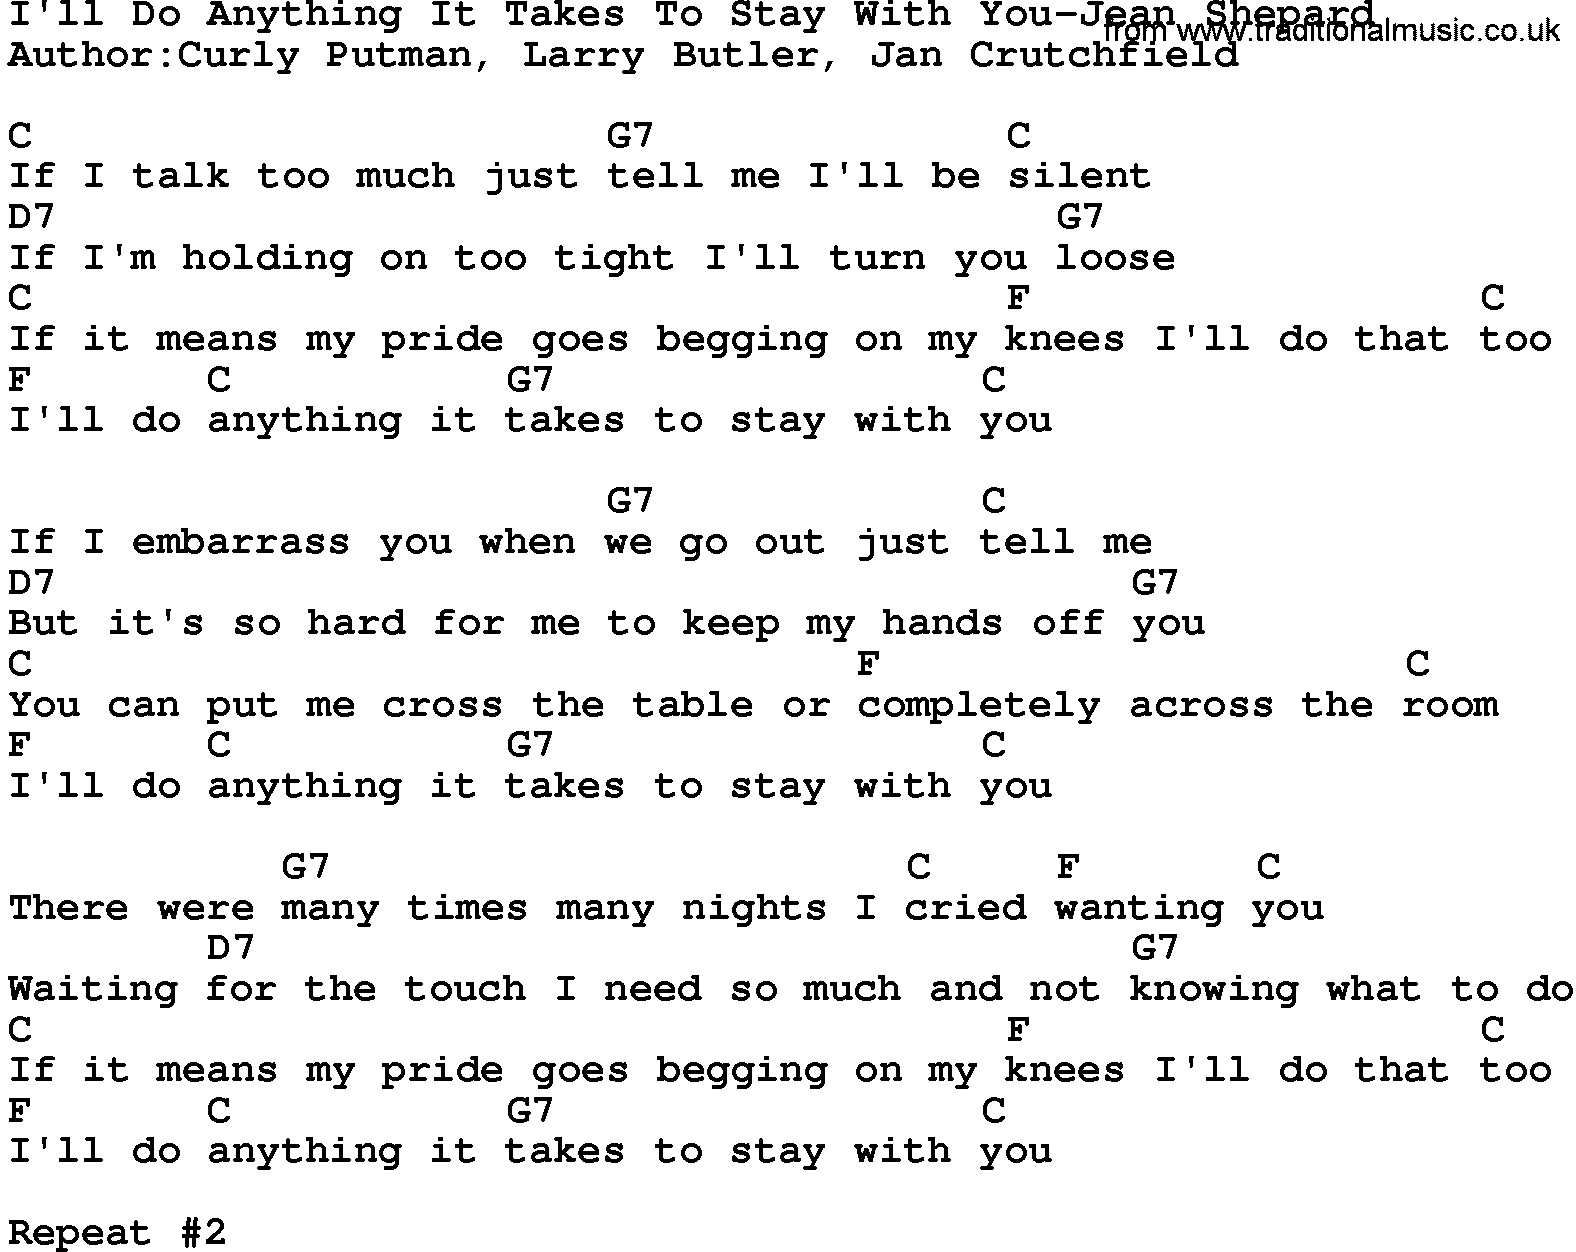 Country music song: I'll Do Anything It Takes To Stay With You-Jean Shepard lyrics and chords